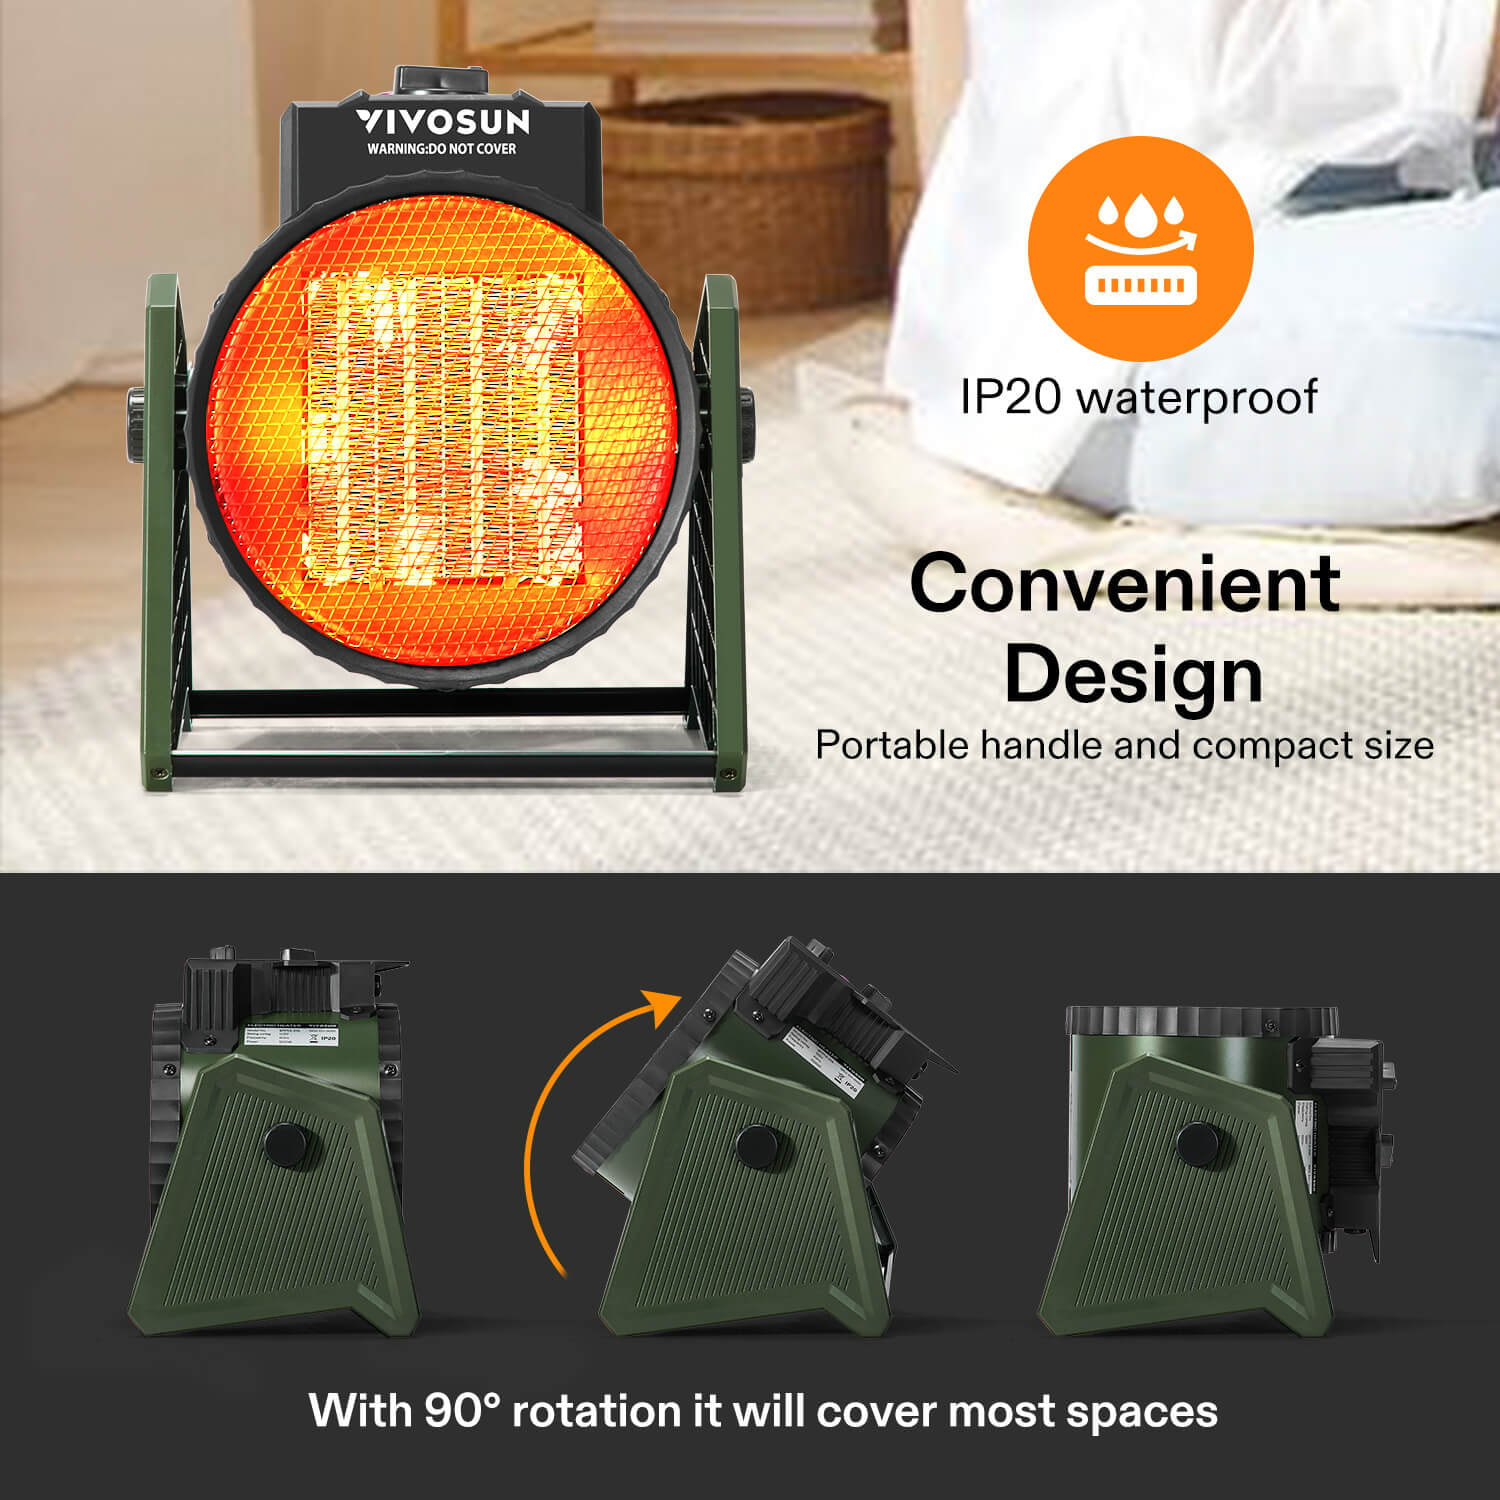 Portable Greenhouse Heater, 1500W/750W Electric Heater with 3 Modes for Fast Heating